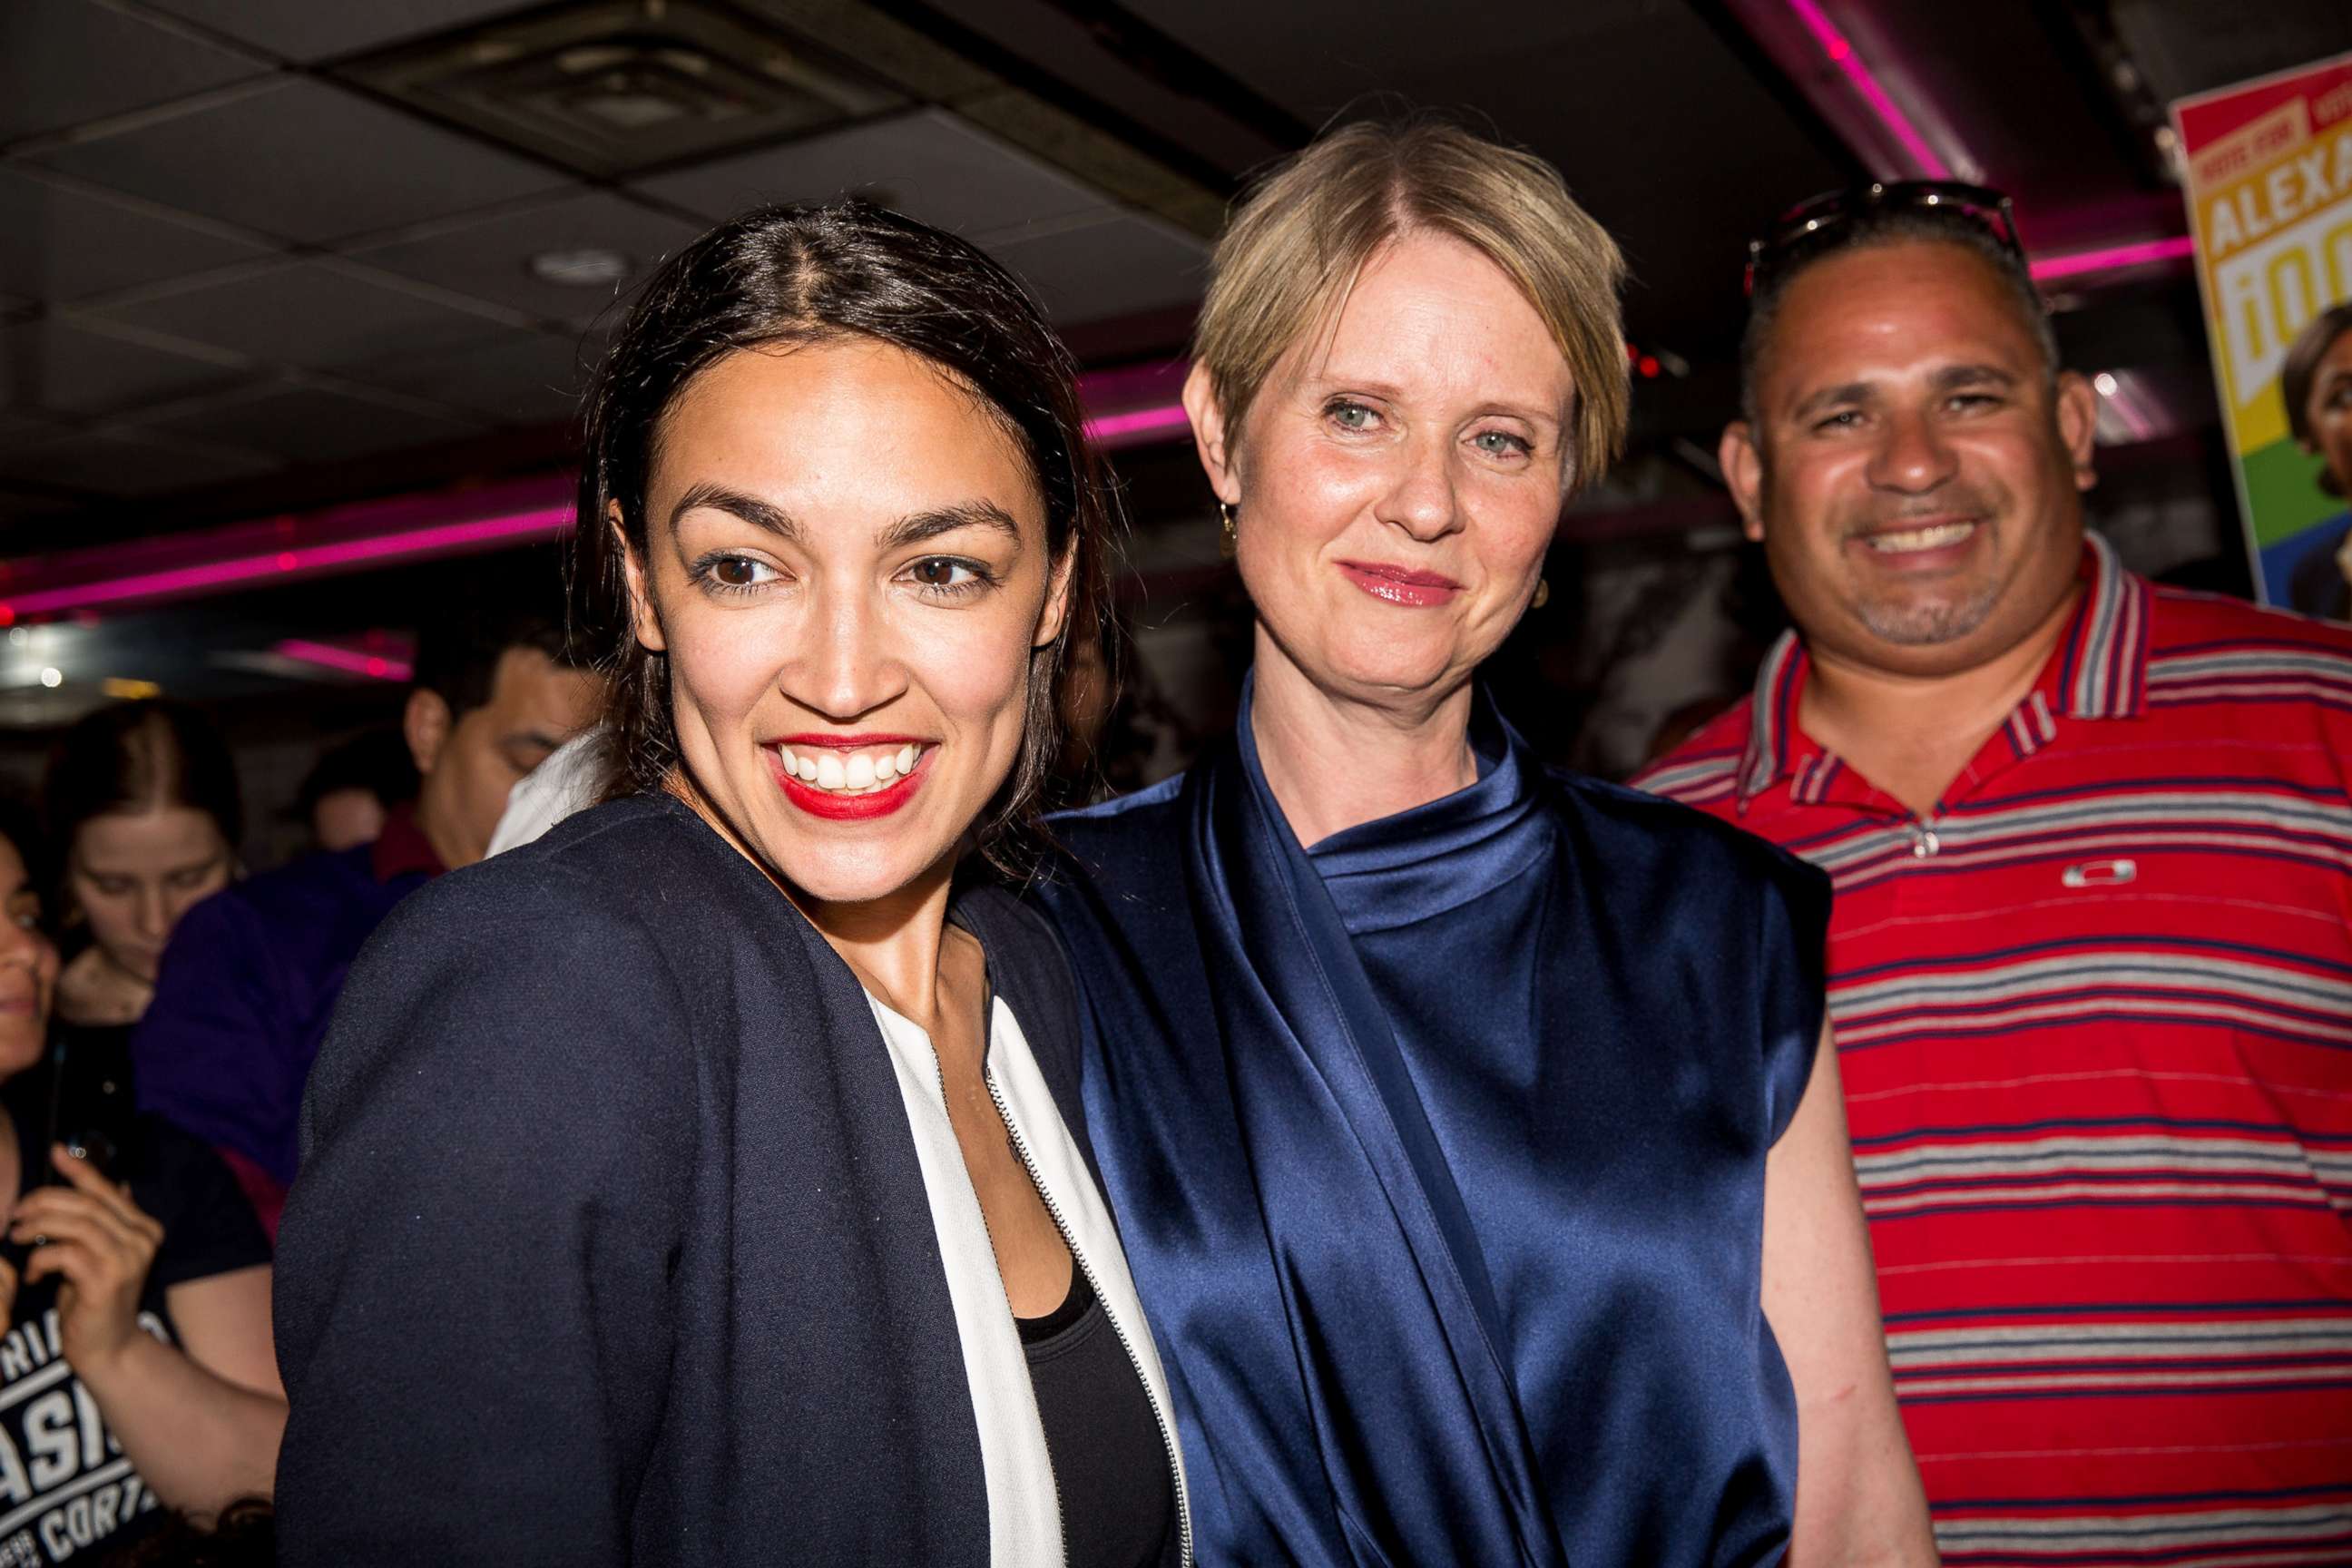 PHOTO: Progressive challenger Alexandria Ocasio-Cortez is joined by New York gubenatorial candidate Cynthia Nixon at her victory party in the Bronx after upsetting incumbent Democratic Representative Joseph Crowly, June 26, 2018, in New York City.